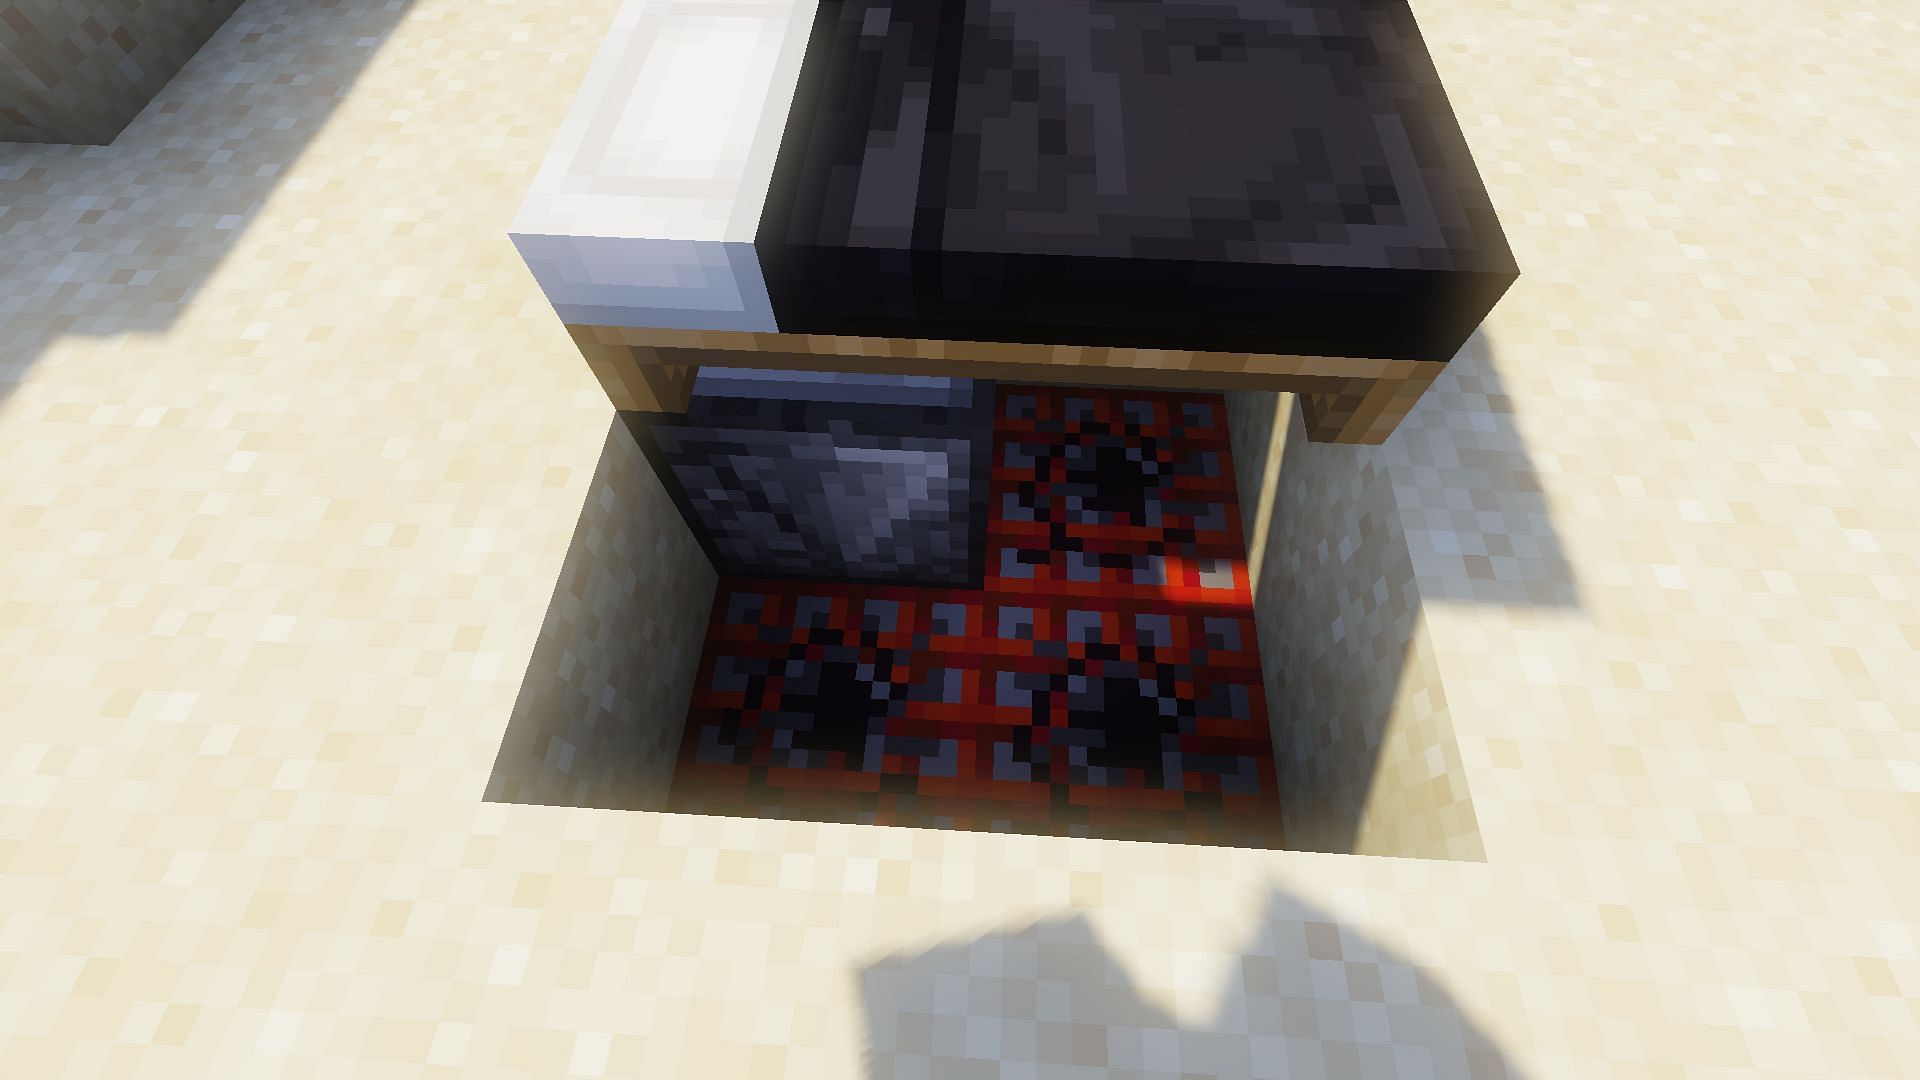 The TNT placed underneath the bed (Image via Minecraft)